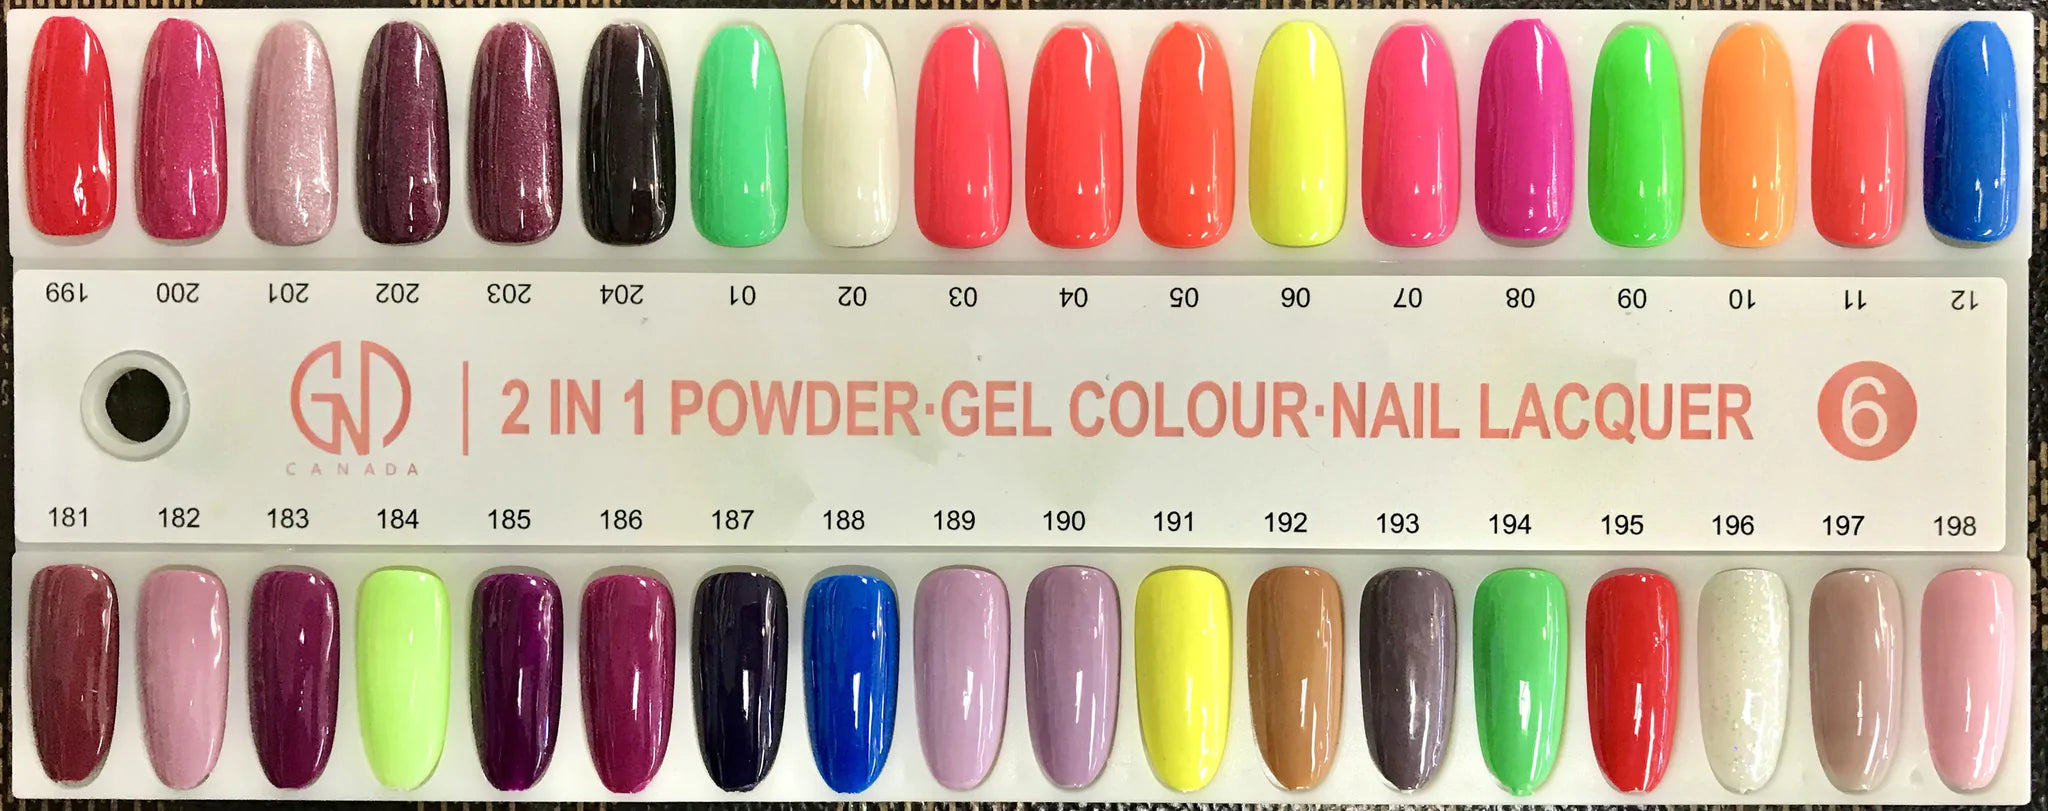 GND Duo Gel & Lacquer 197